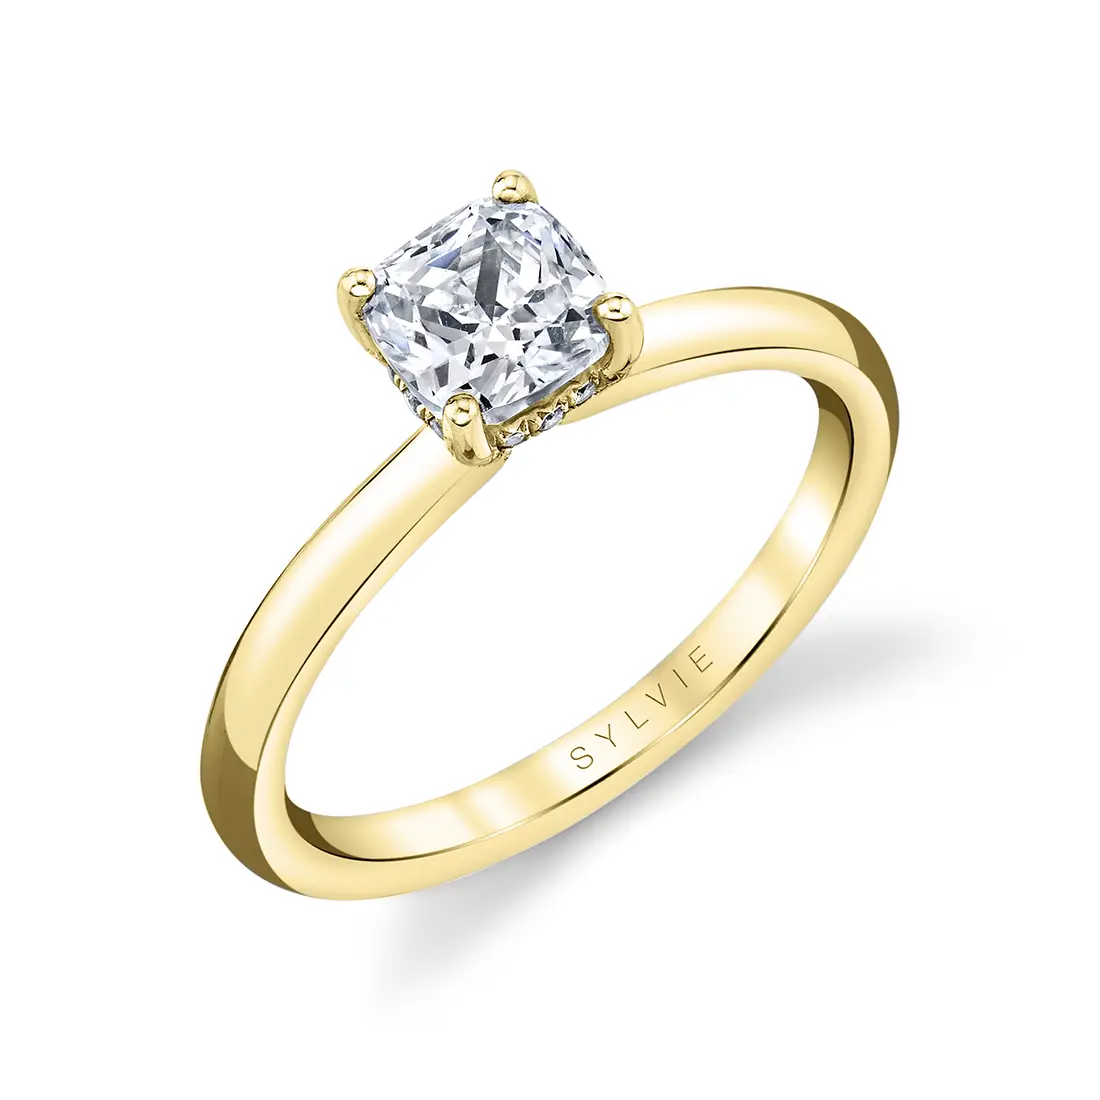 solitaire cushion cut engagement ring